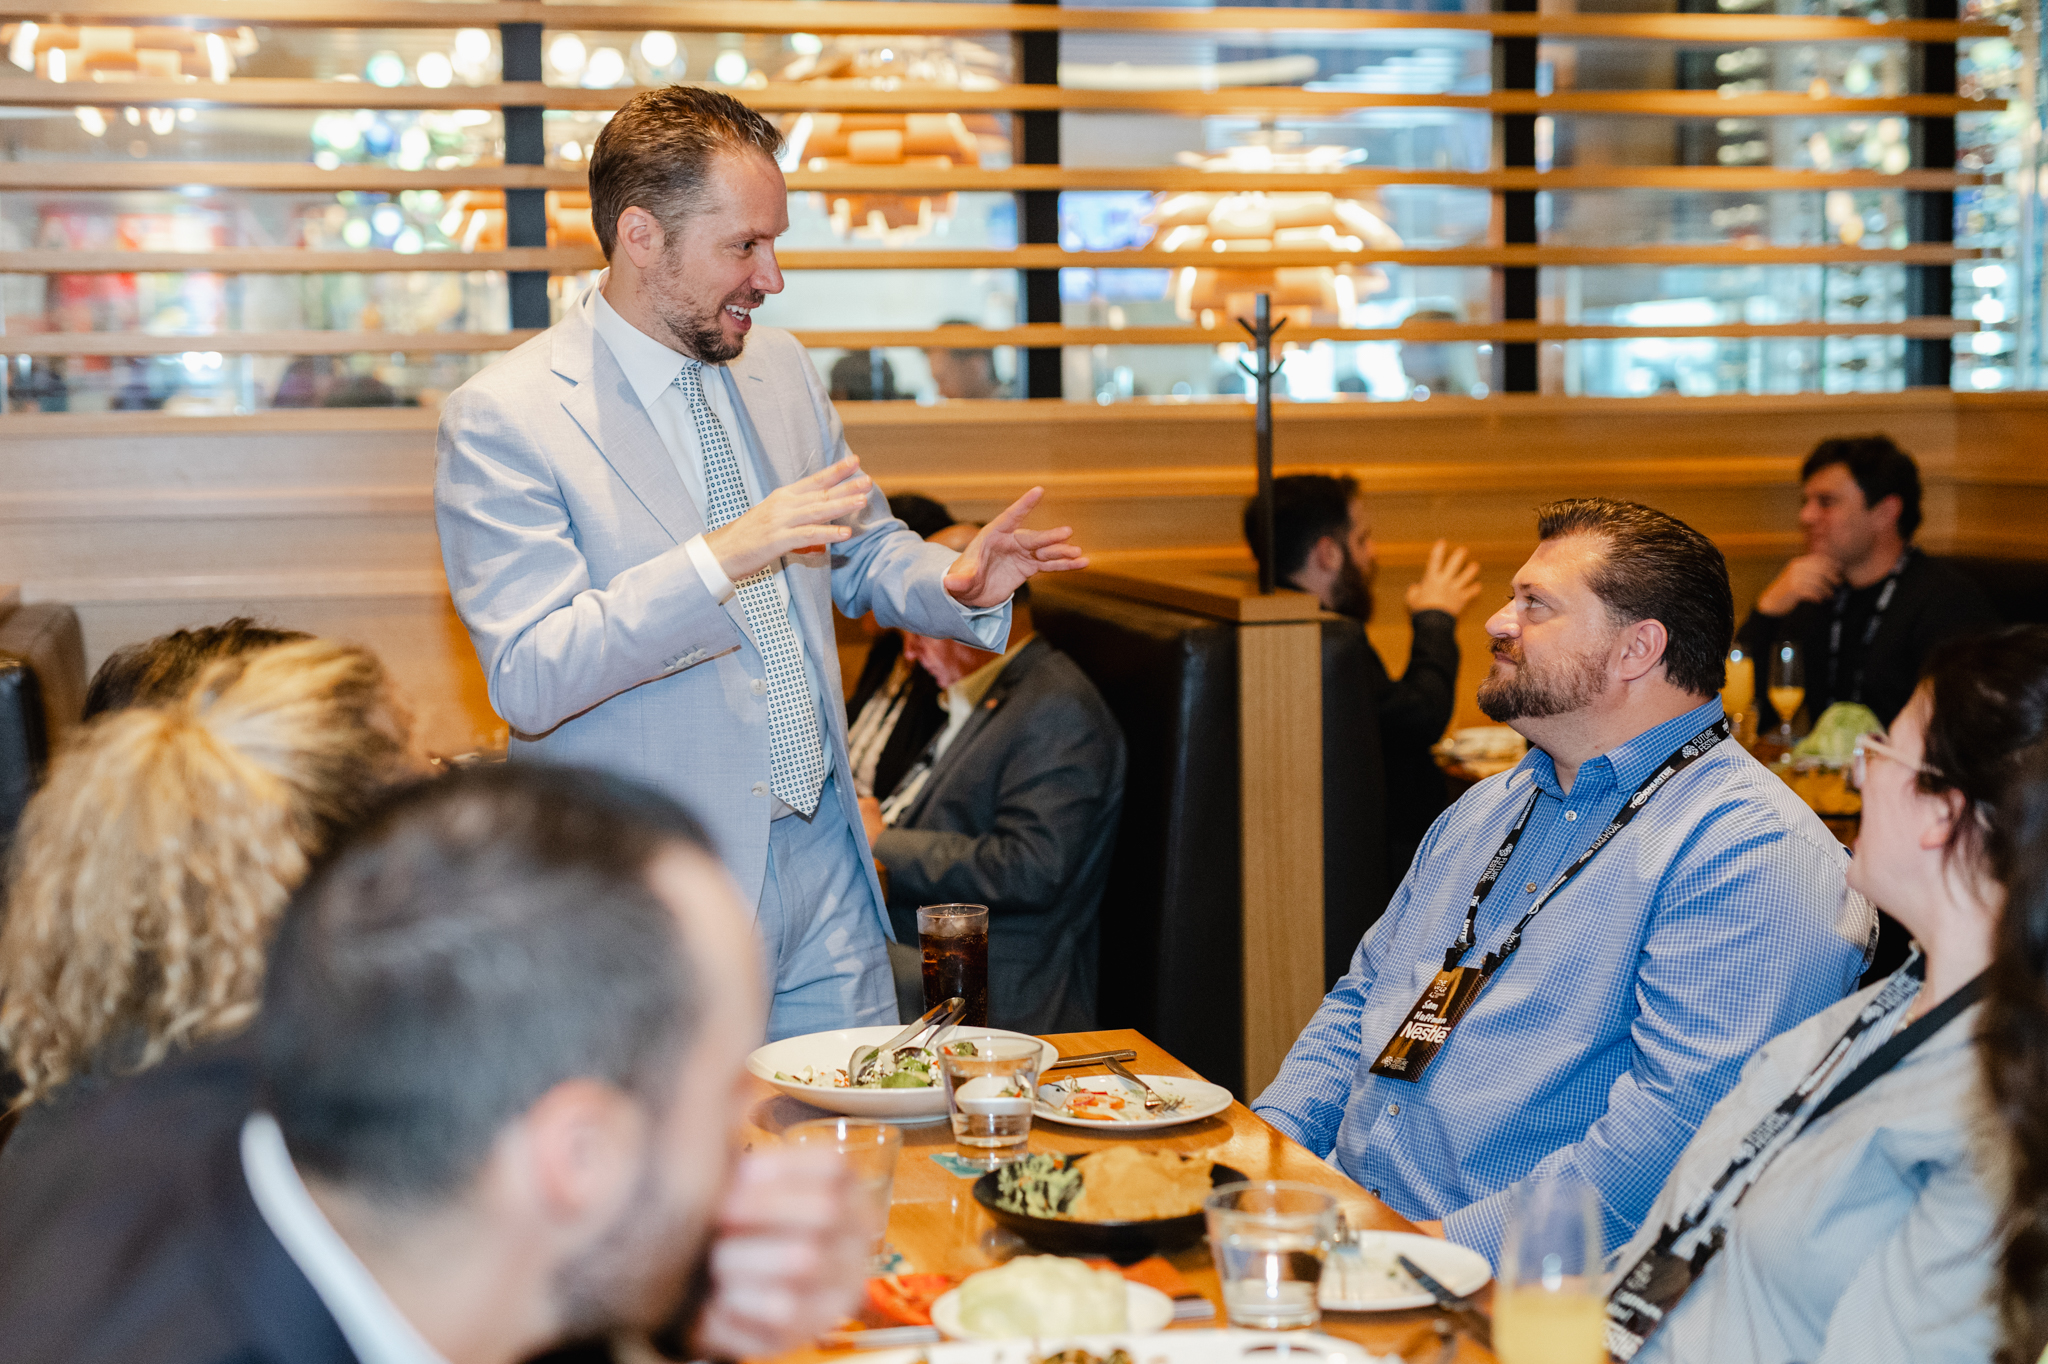 An individual giving a speech to a gathering at a restaurant.